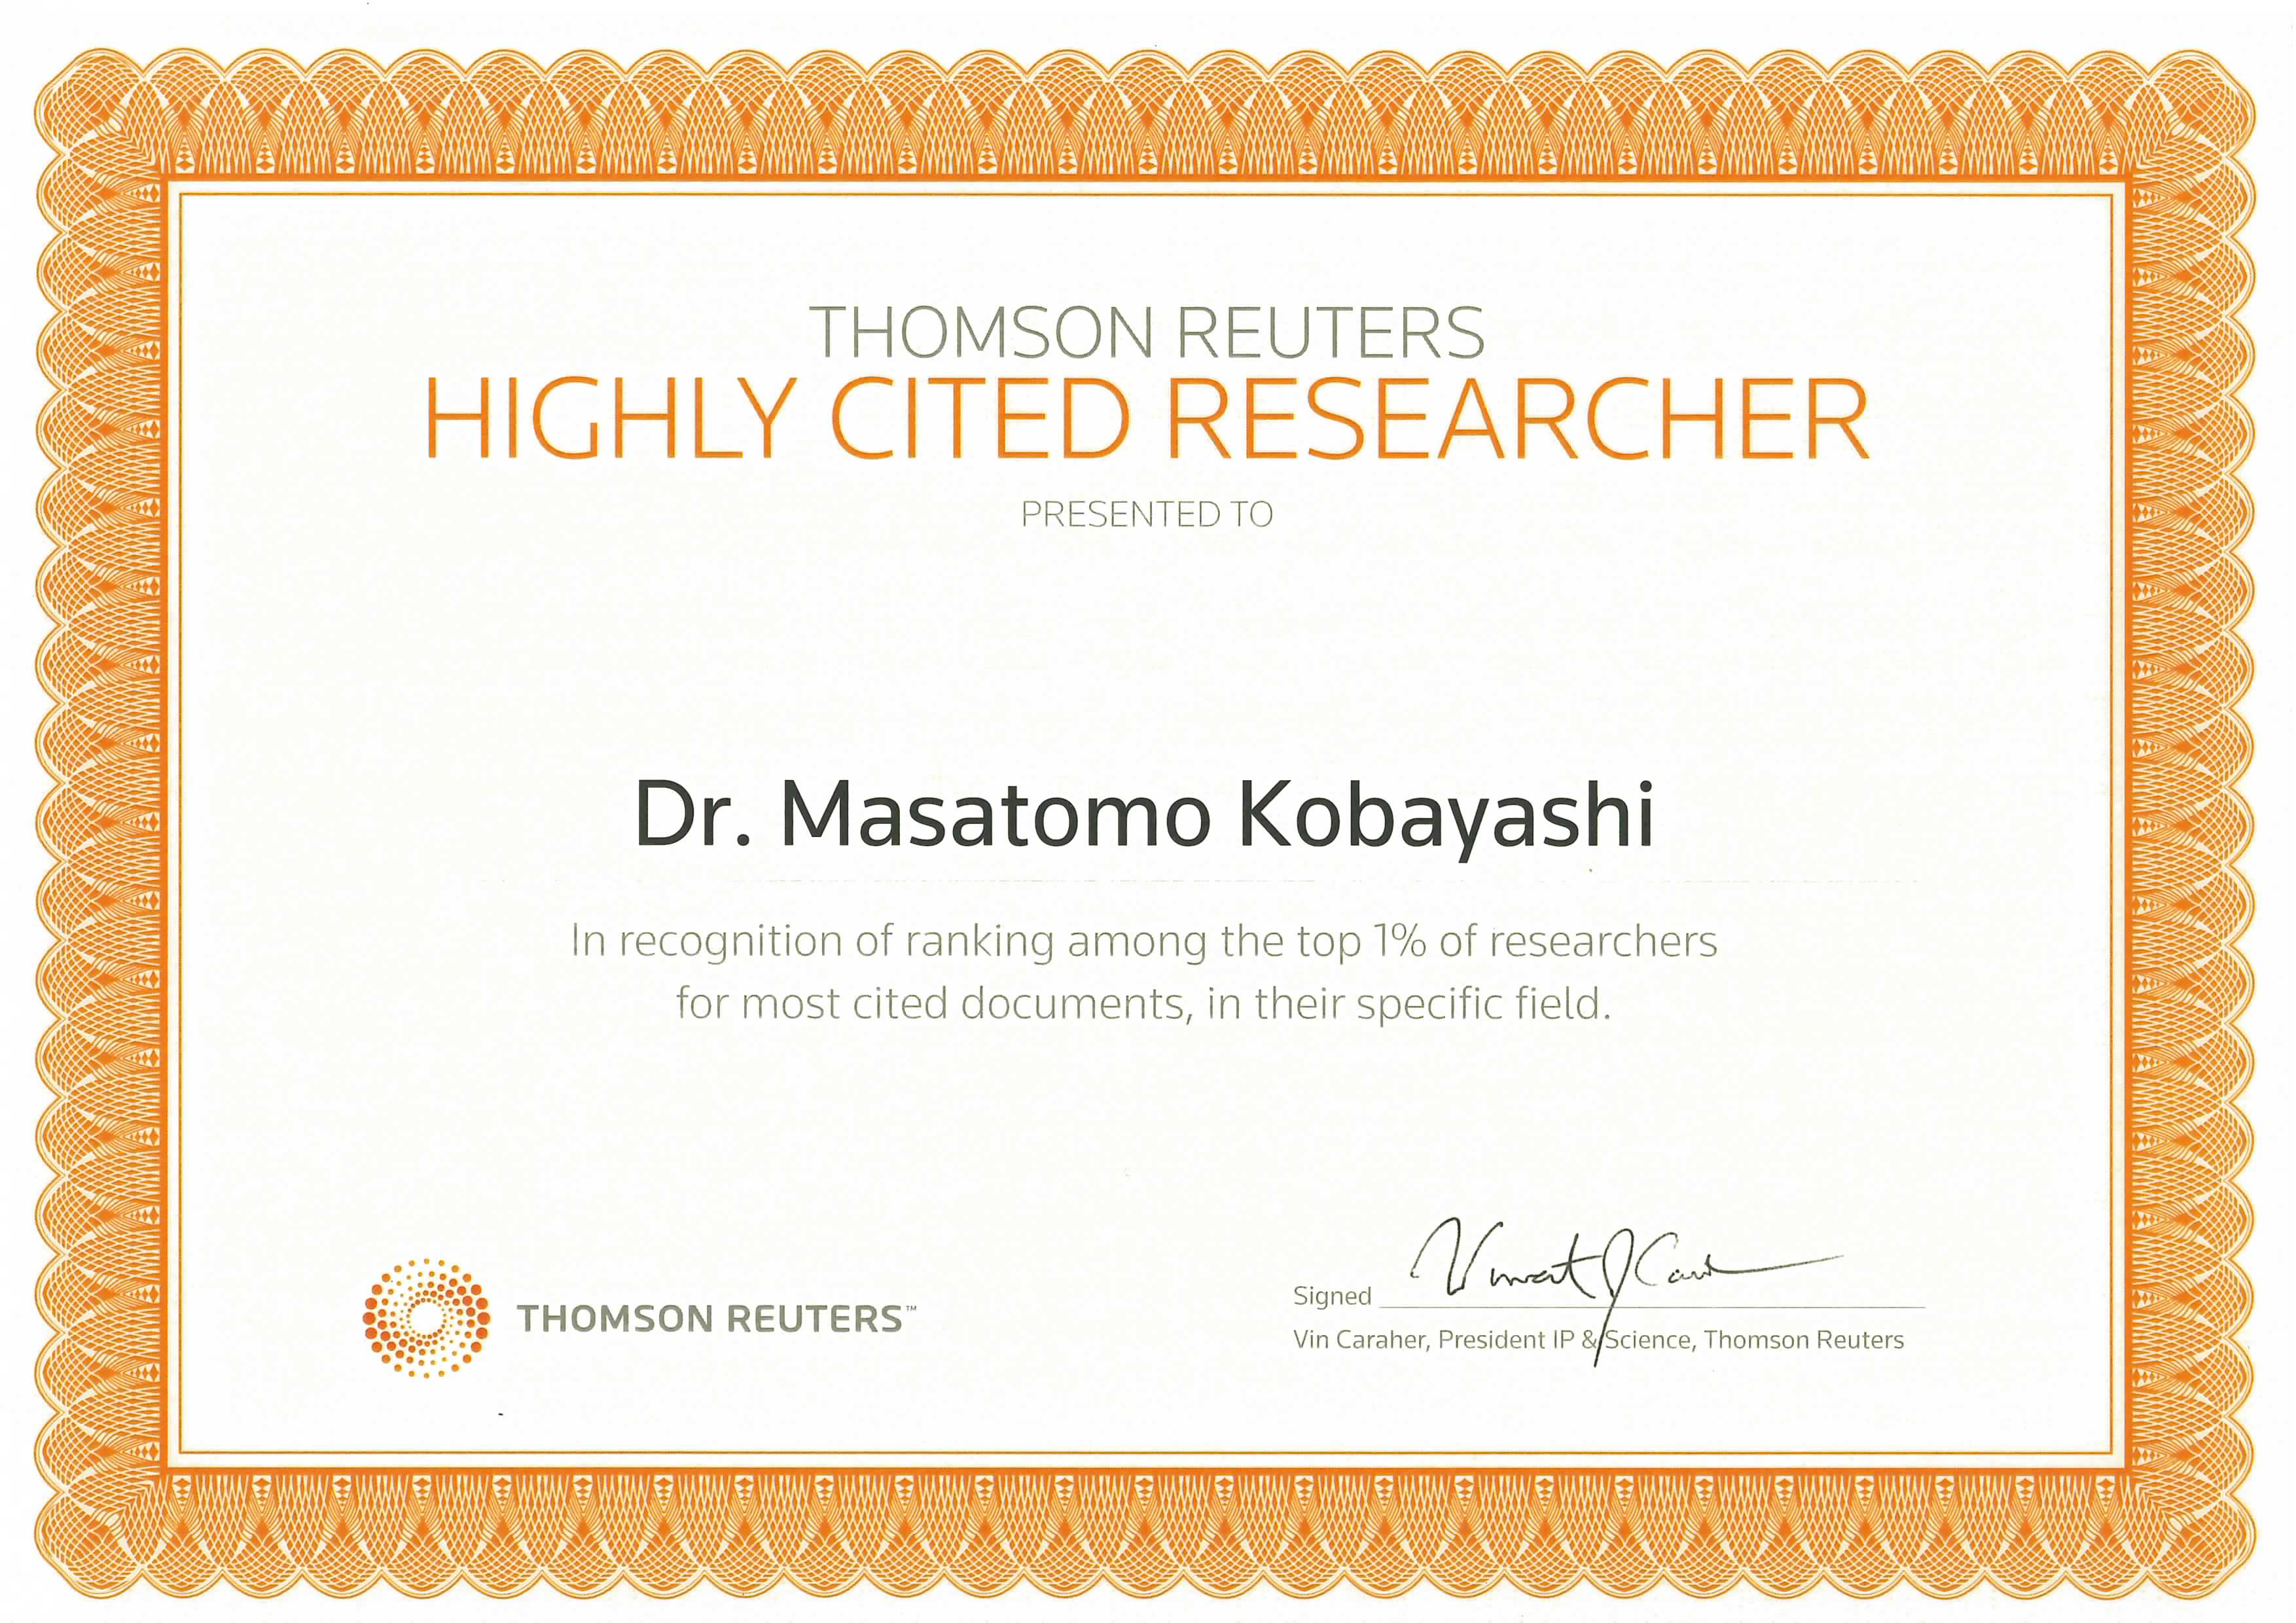 Dr. Masatomo Kobayashi has been selected for Highly Cited Researchers 2015